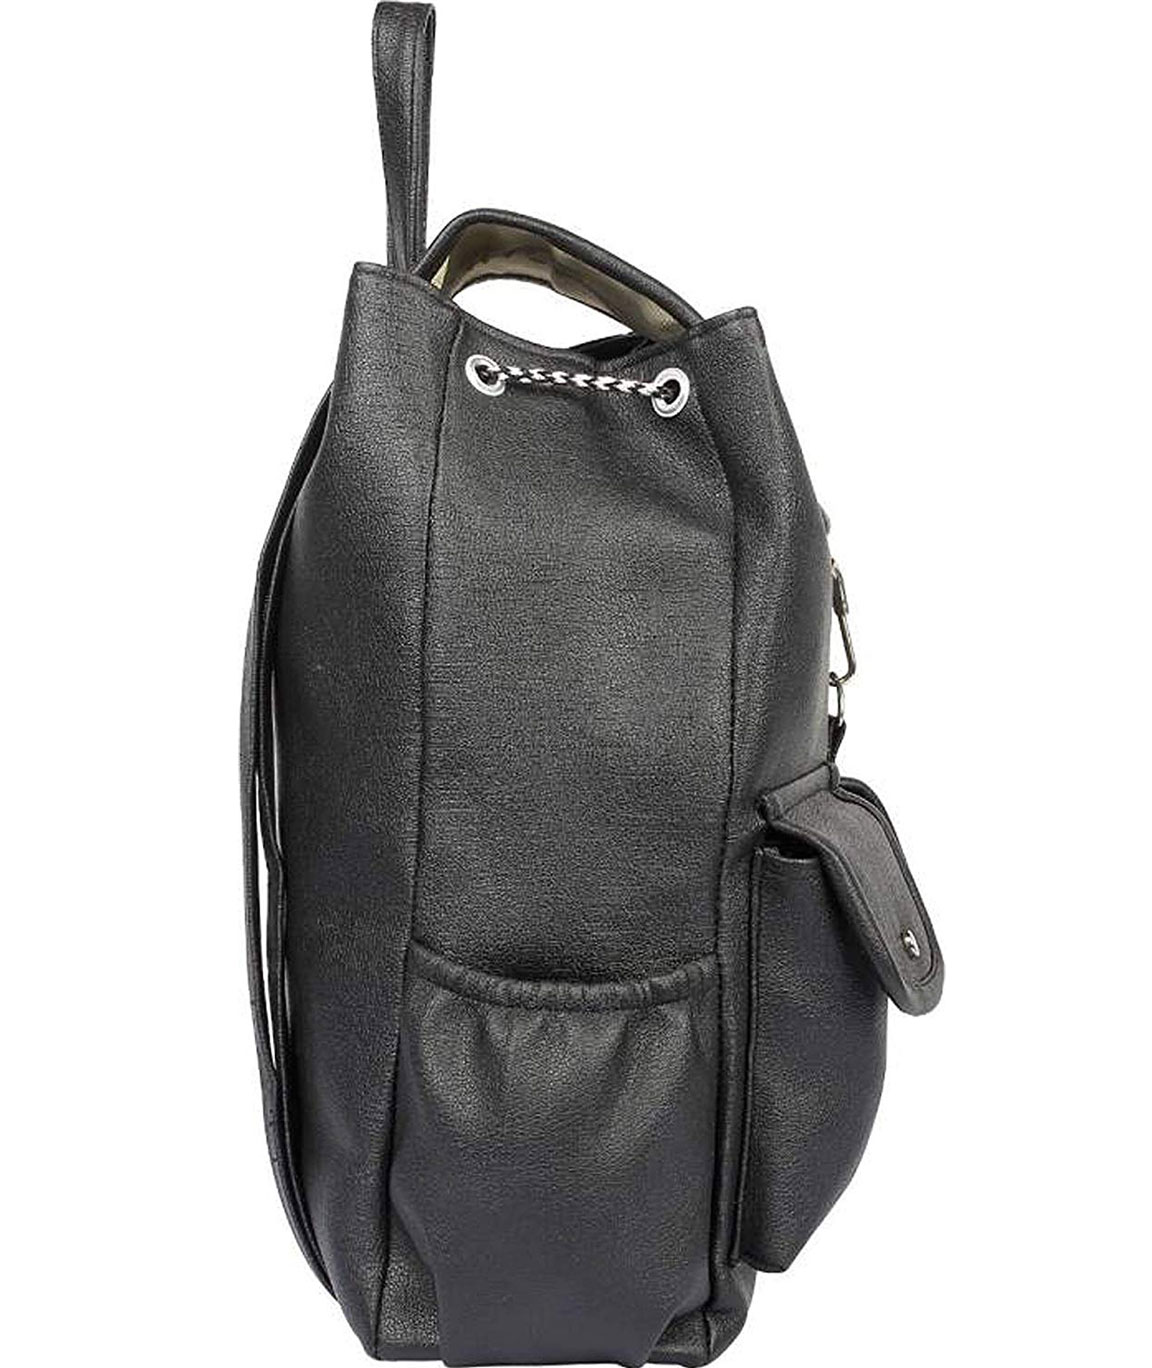 CALVIN KLEIN Estelle sherpa and patent leather backpack - Black | eBay